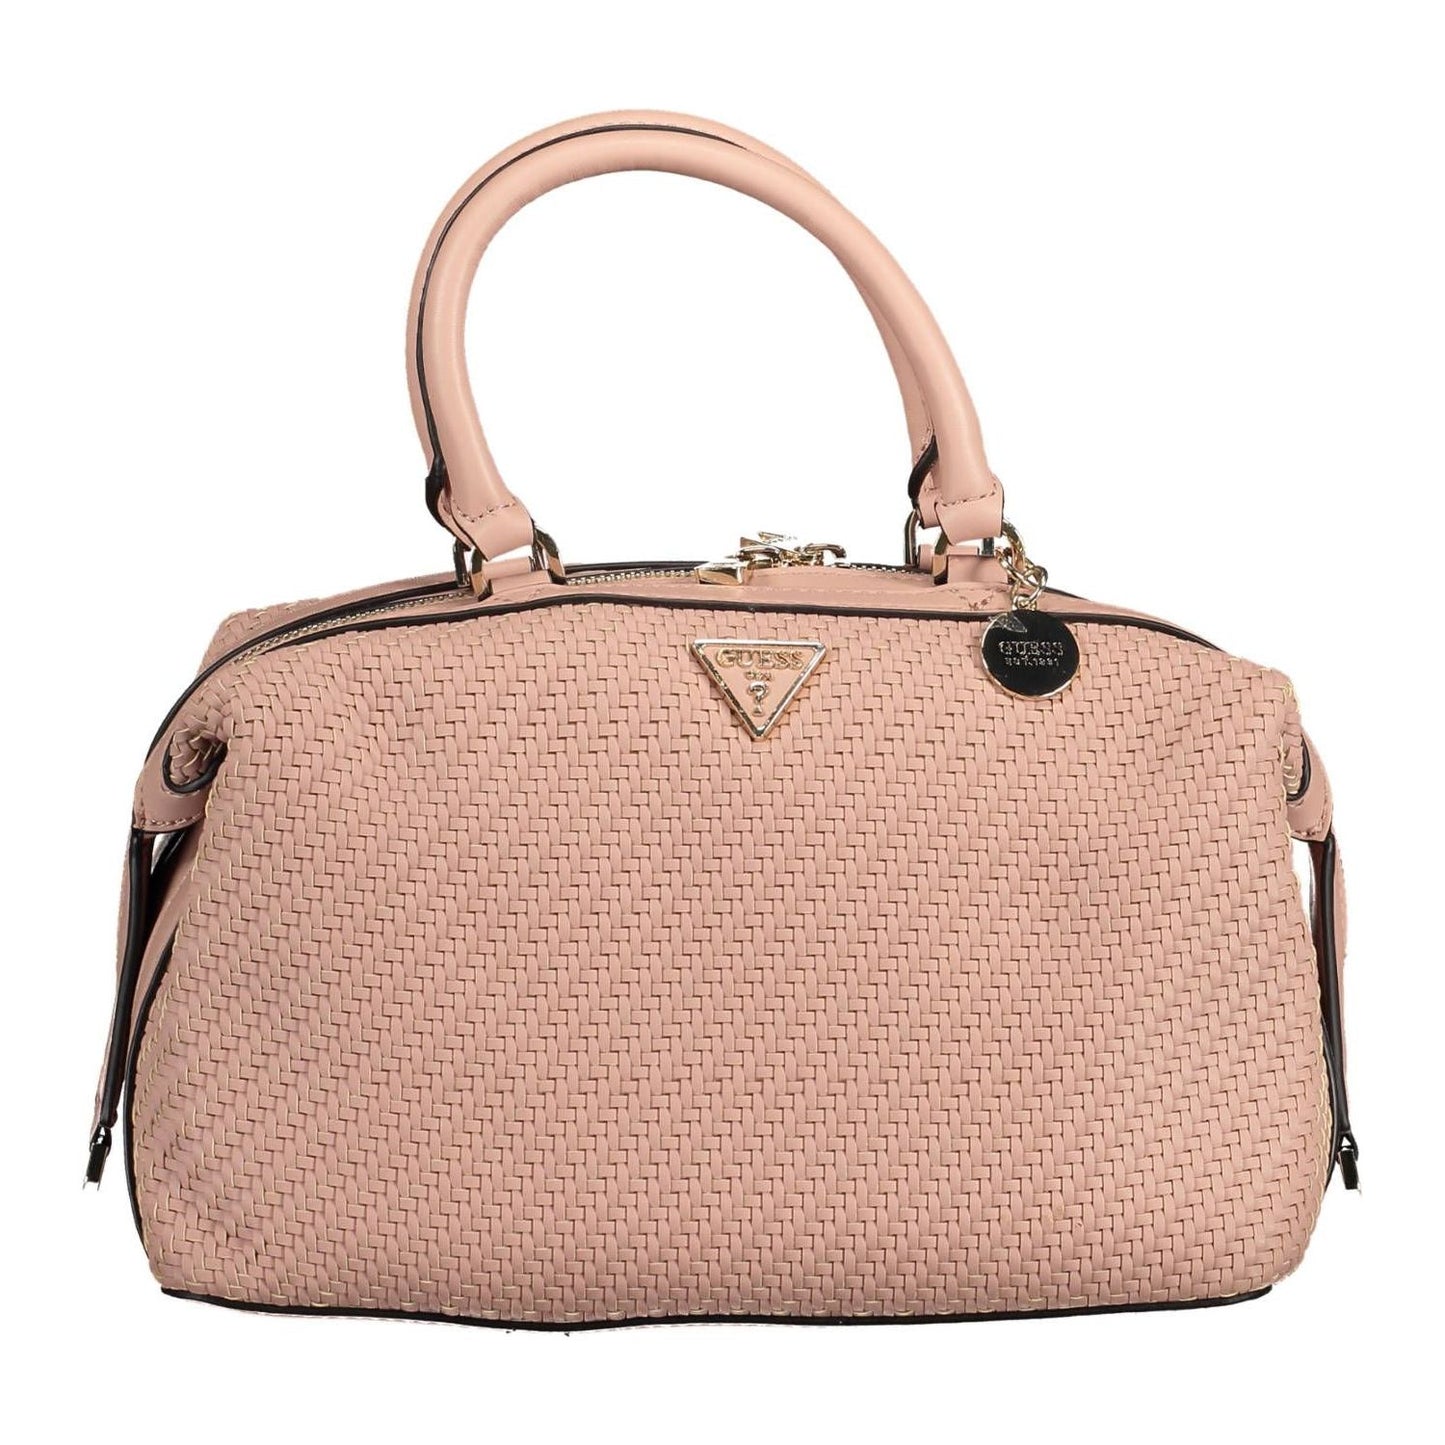 Guess Jeans Chic Pink Satchel with Contrasting Details chic-pink-satchel-with-contrasting-details